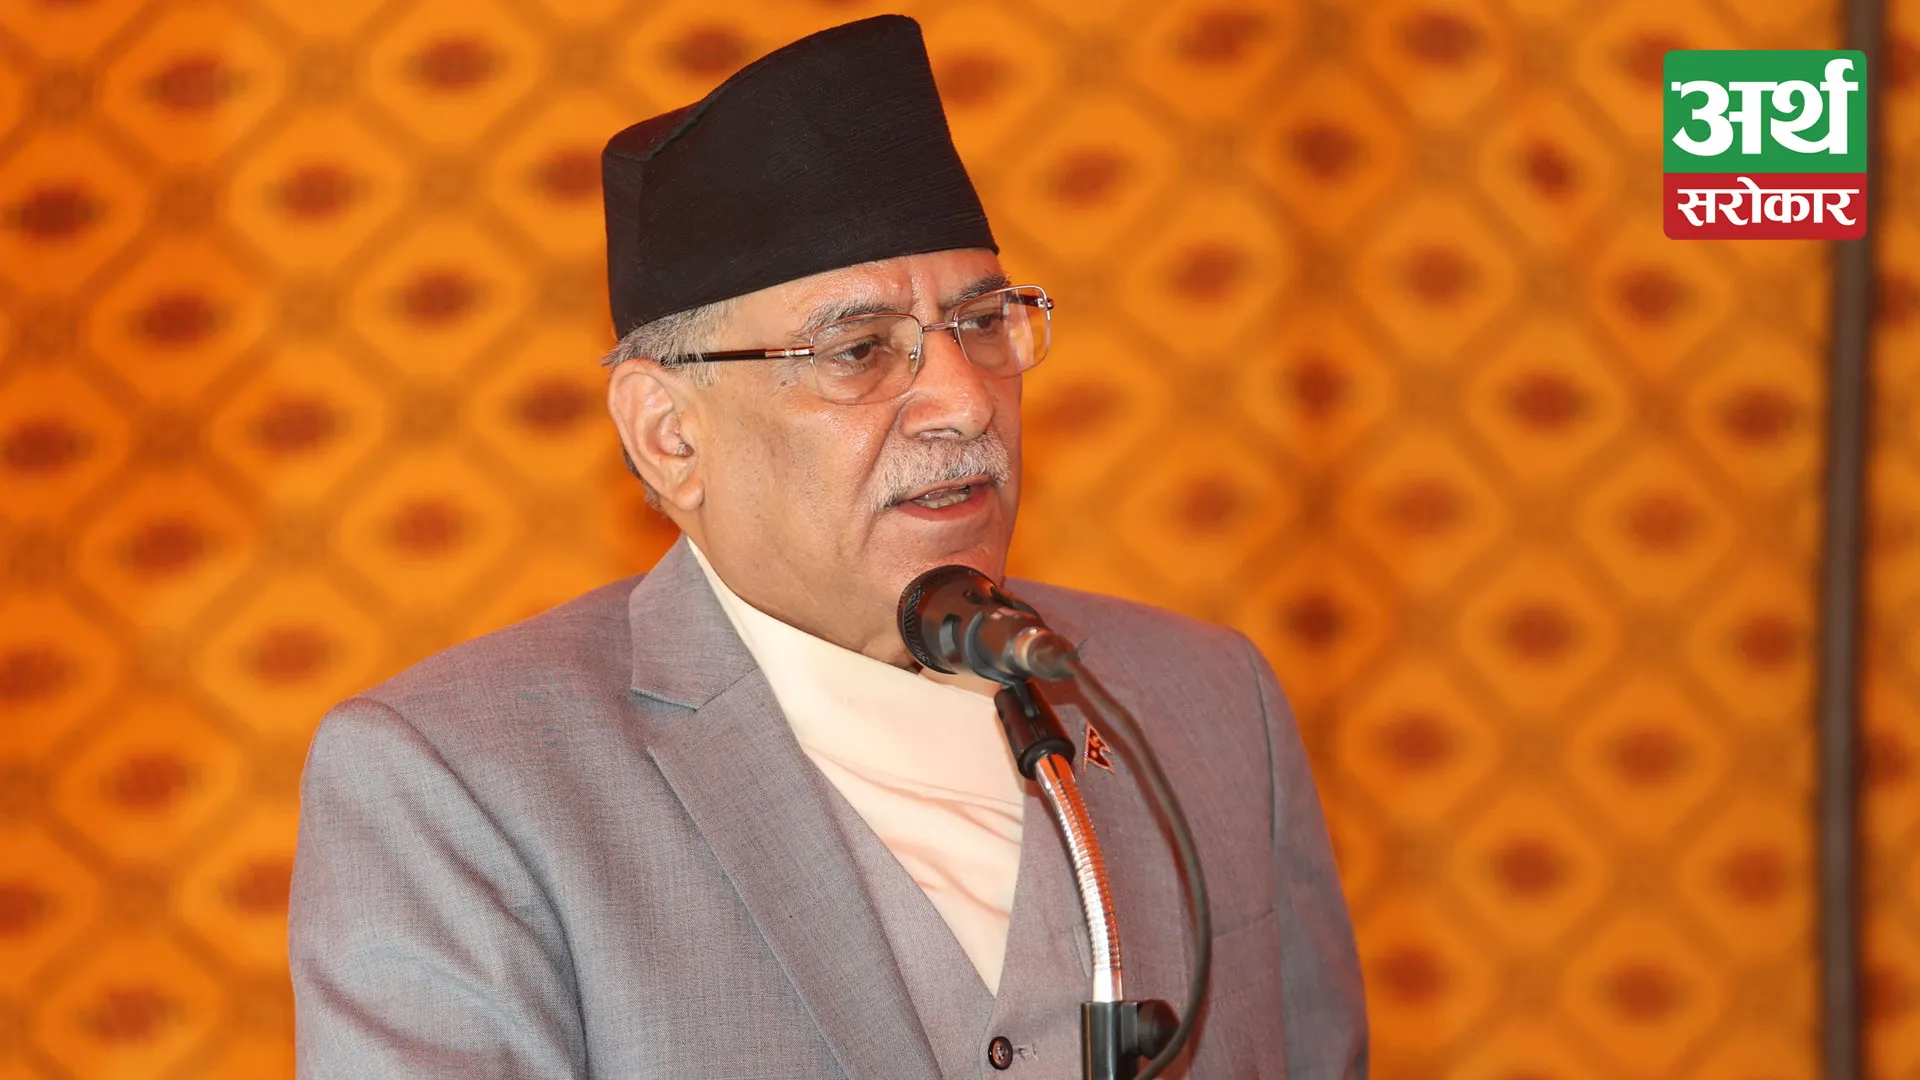 Bill related to Federal Civil Service to be endorsed by parliament at the earliest: PM Dahal